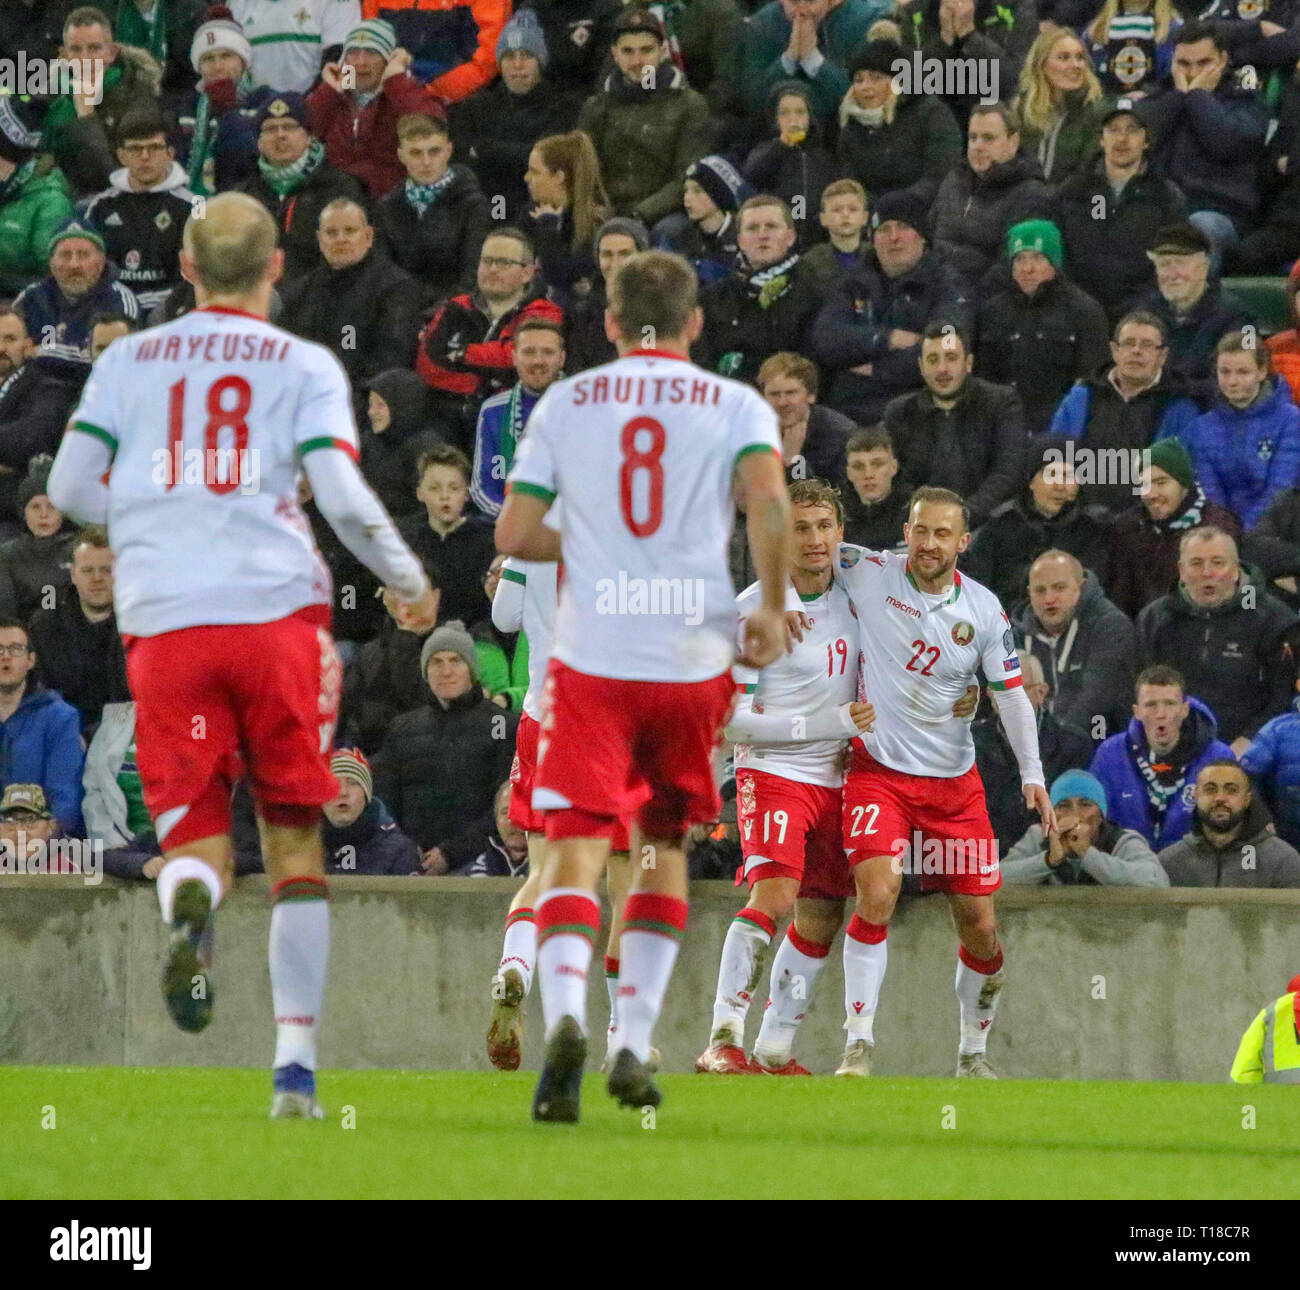 National Football Stadium at Windsor Park, Belfast, Northern Ireland. 24  March 2019. UEFA EURO 2020 Qualifier- Northern Ireland v Belarus. Action from tonight's game. Igor Stasevich (22) celebrates his goal for Belarus.  Credit: David Hunter/Alamy Live News. Stock Photo